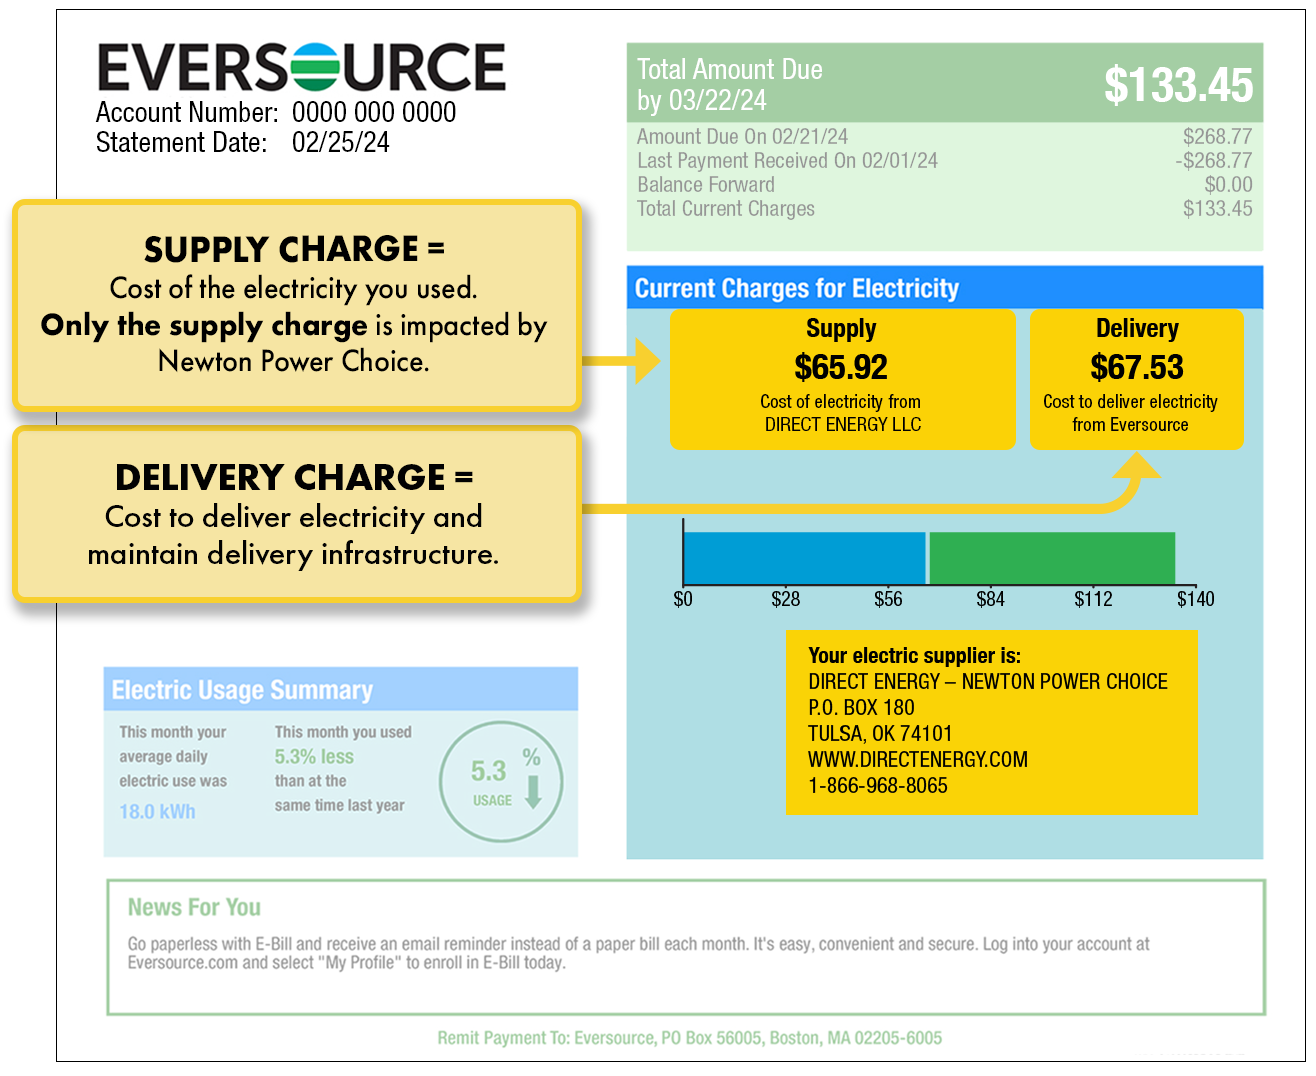 Page 1 Eversource bill example illustrating supply and delivery charges and electricity supplier contact information. The charges and the supplier information are found under Current Charges for Electricity.